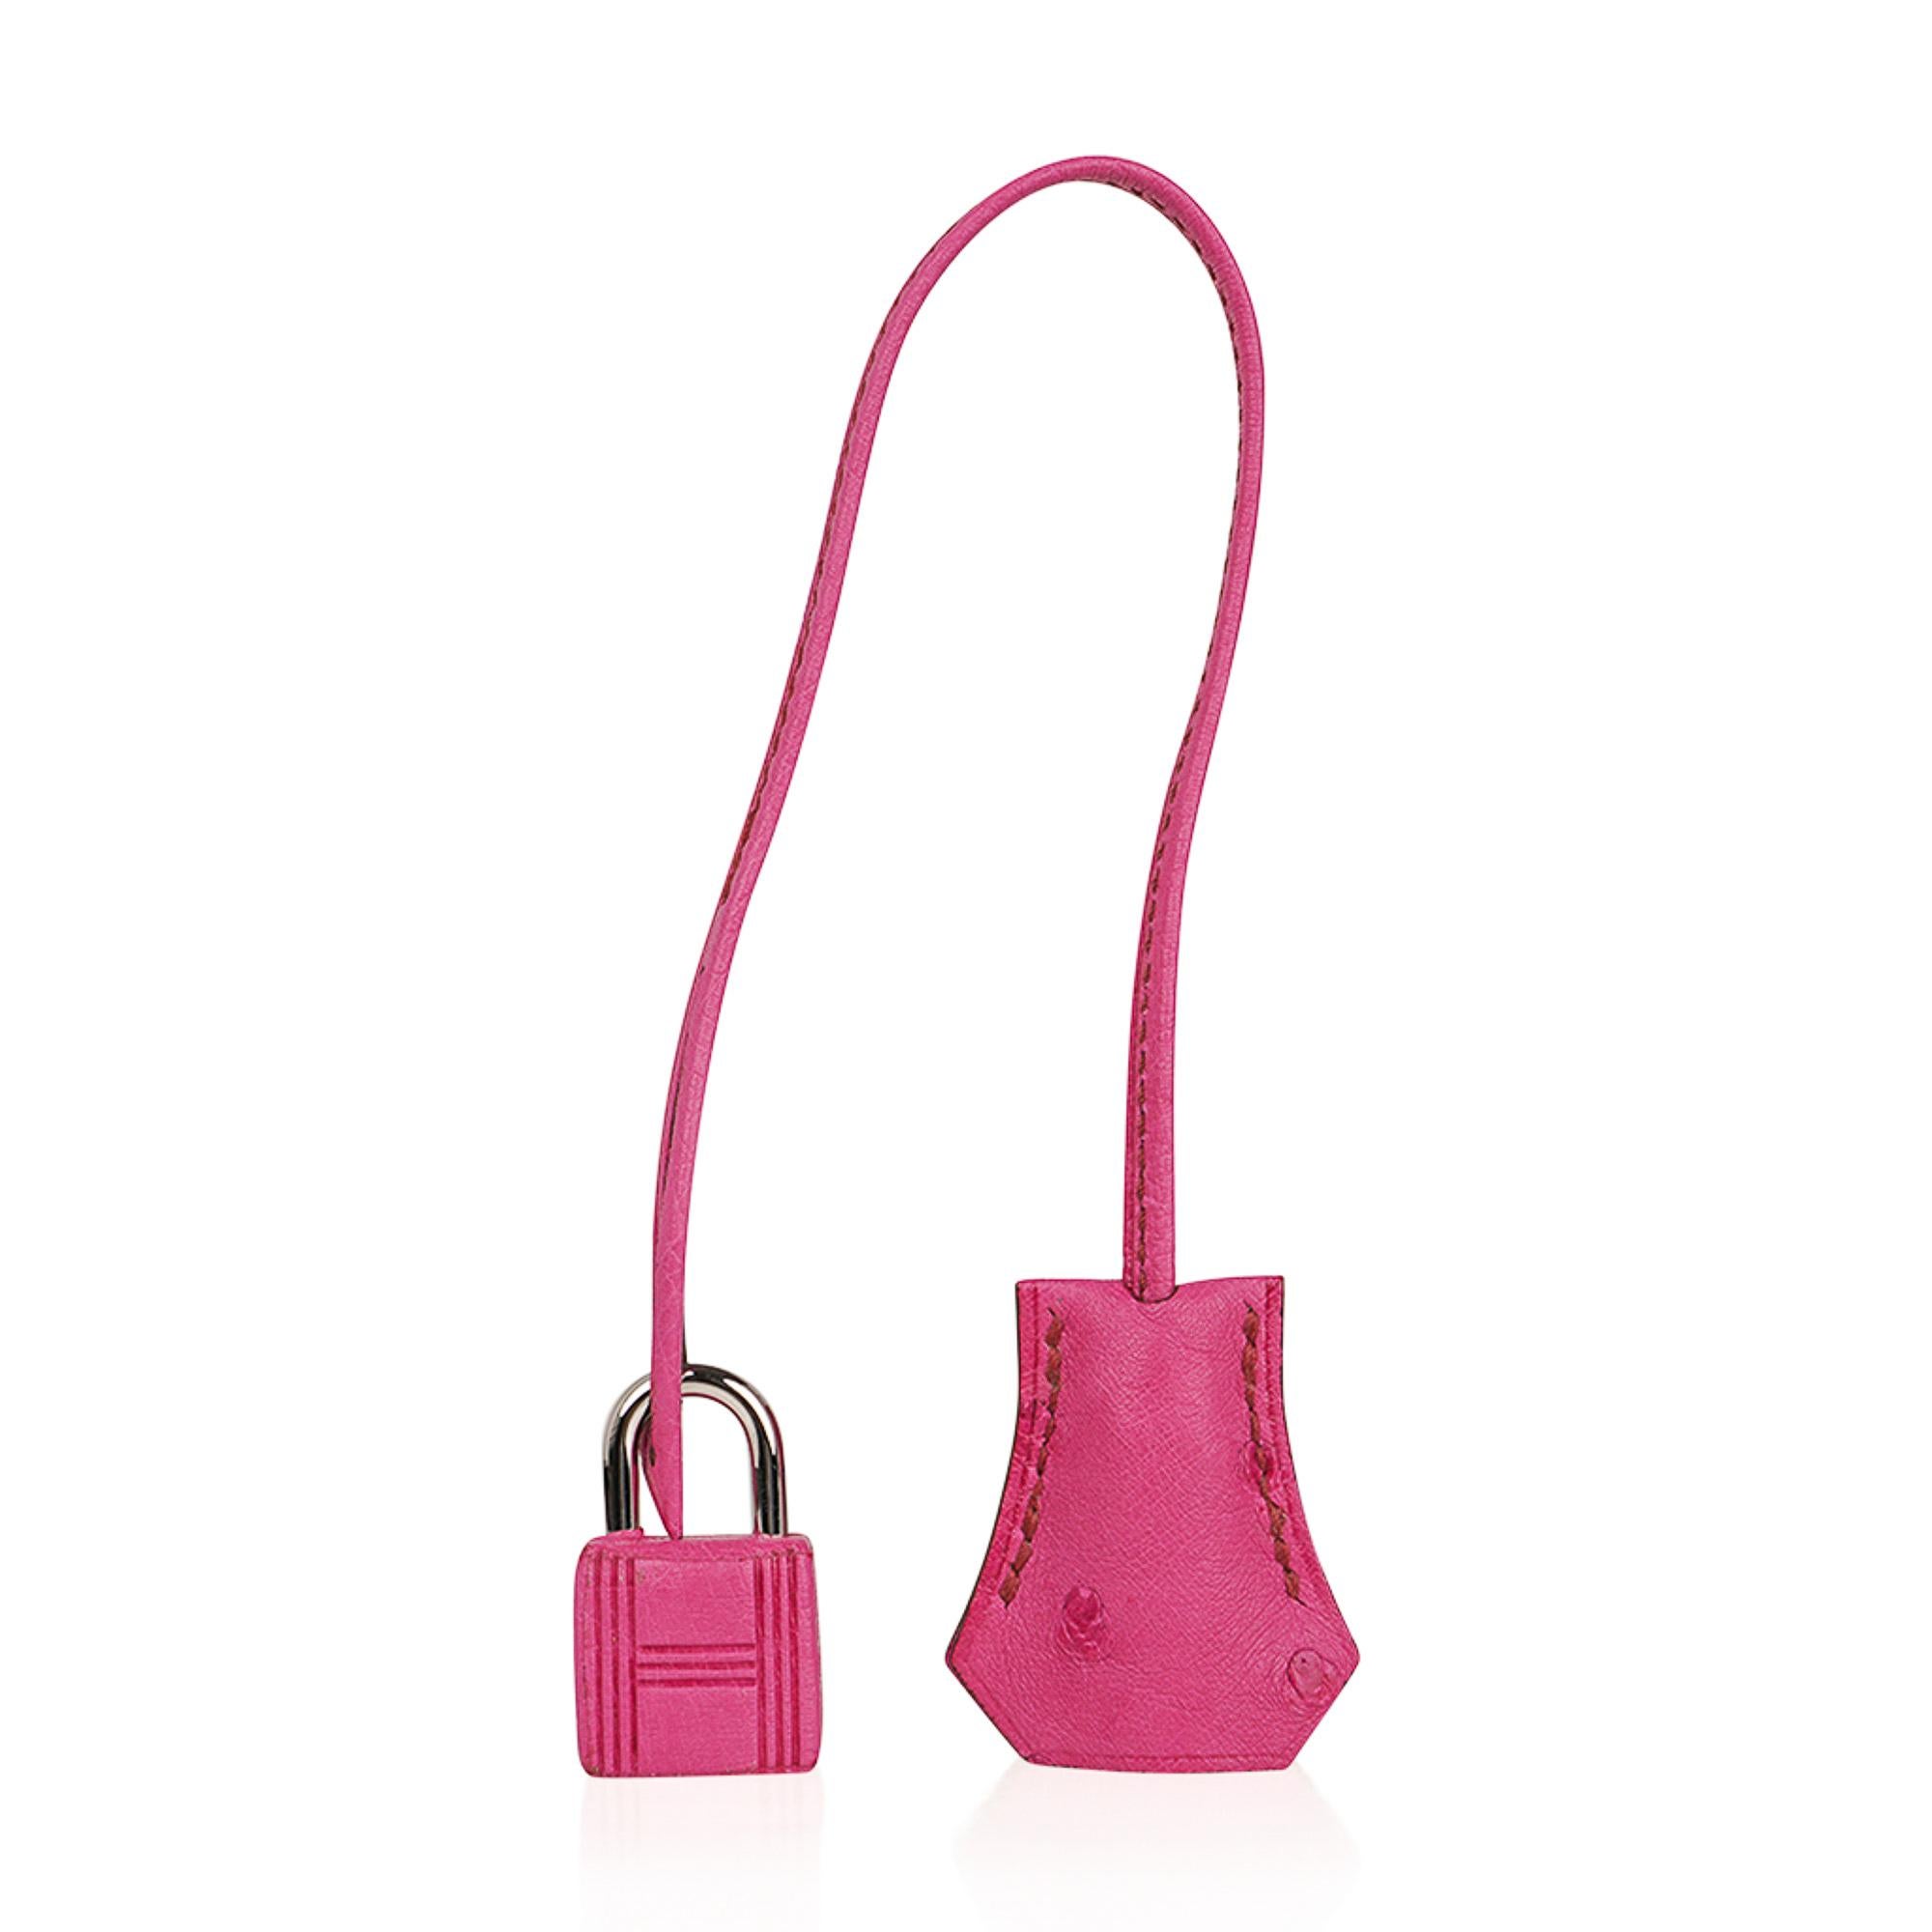 Mightychic offers a guaranteed authentic Hermes Birkin 35 featured in Fuchsia Pink Ostrich.
This coveted colour is retired and a collectors treasure.
This Hermes Birkin is fresh with palladium hardware.
Comes with lock, keys, clochette and 